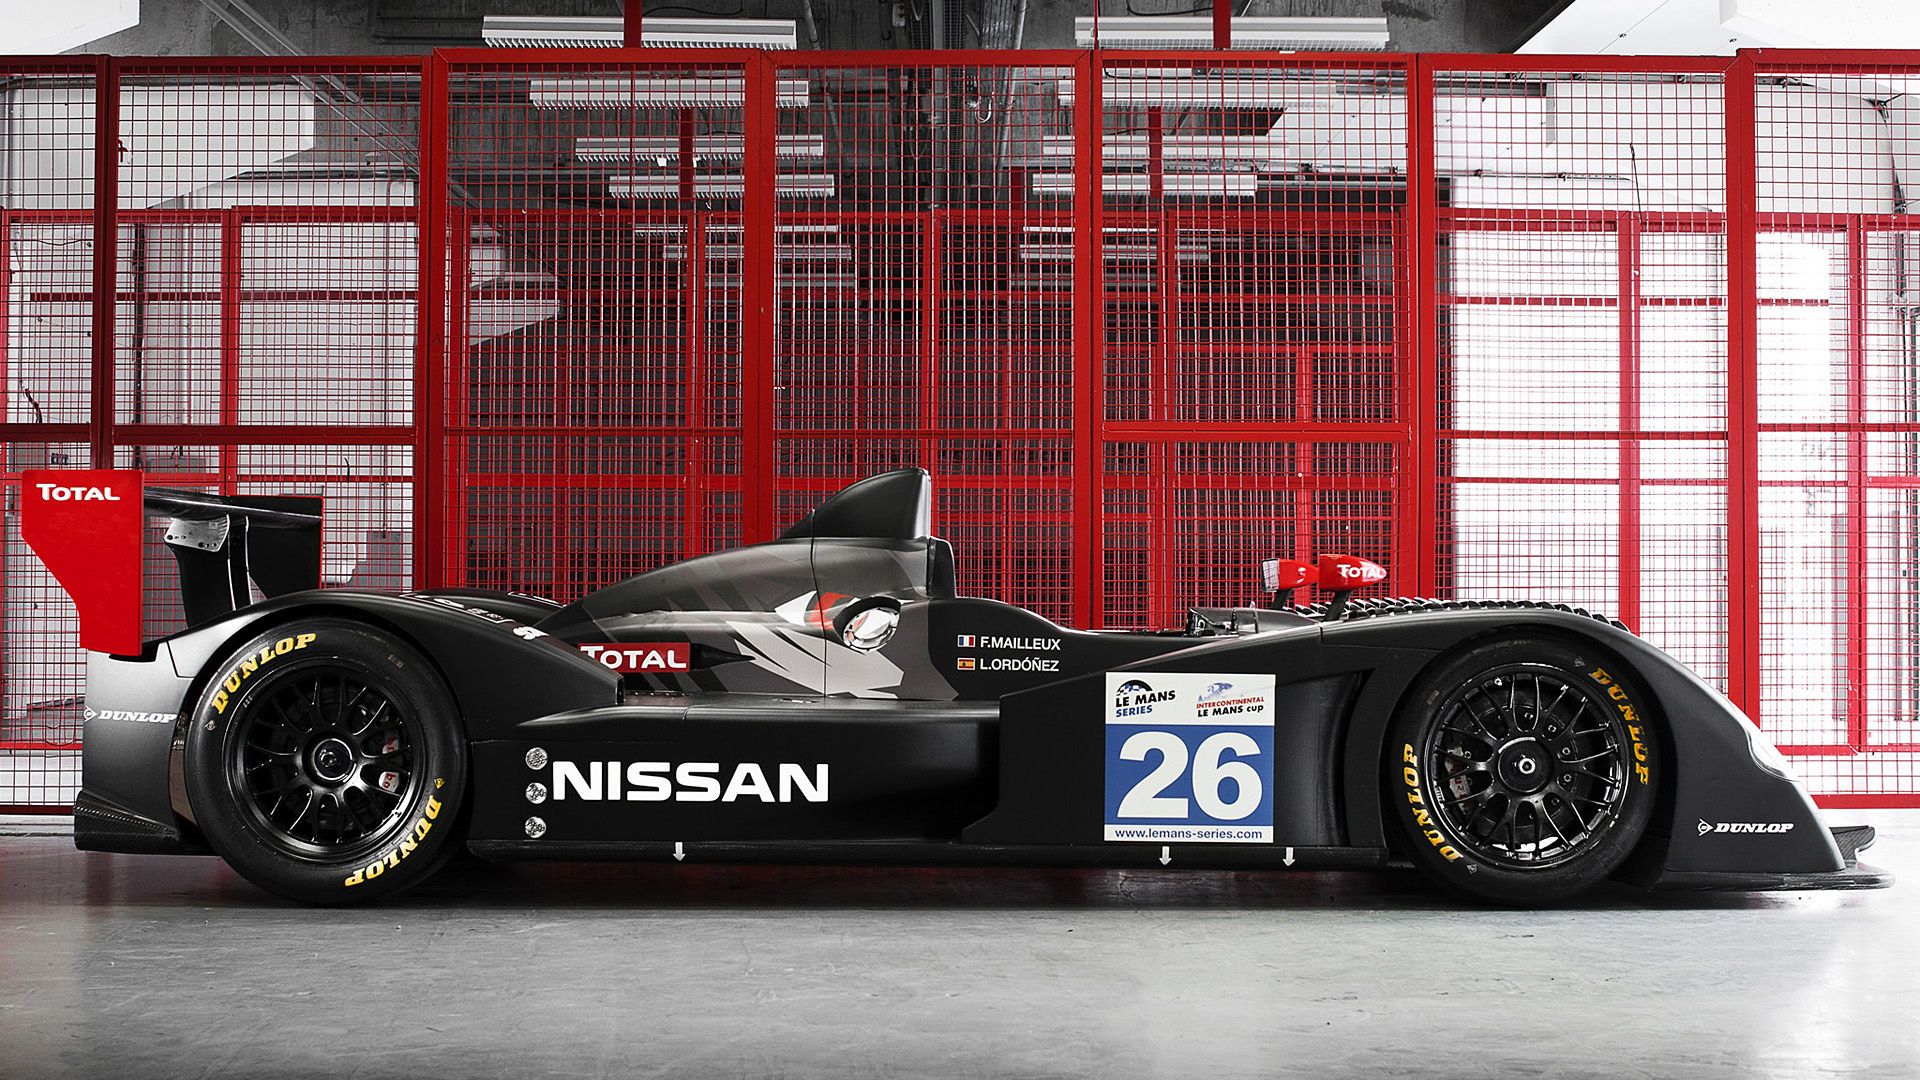 Nissan found succss in the LMP2 category